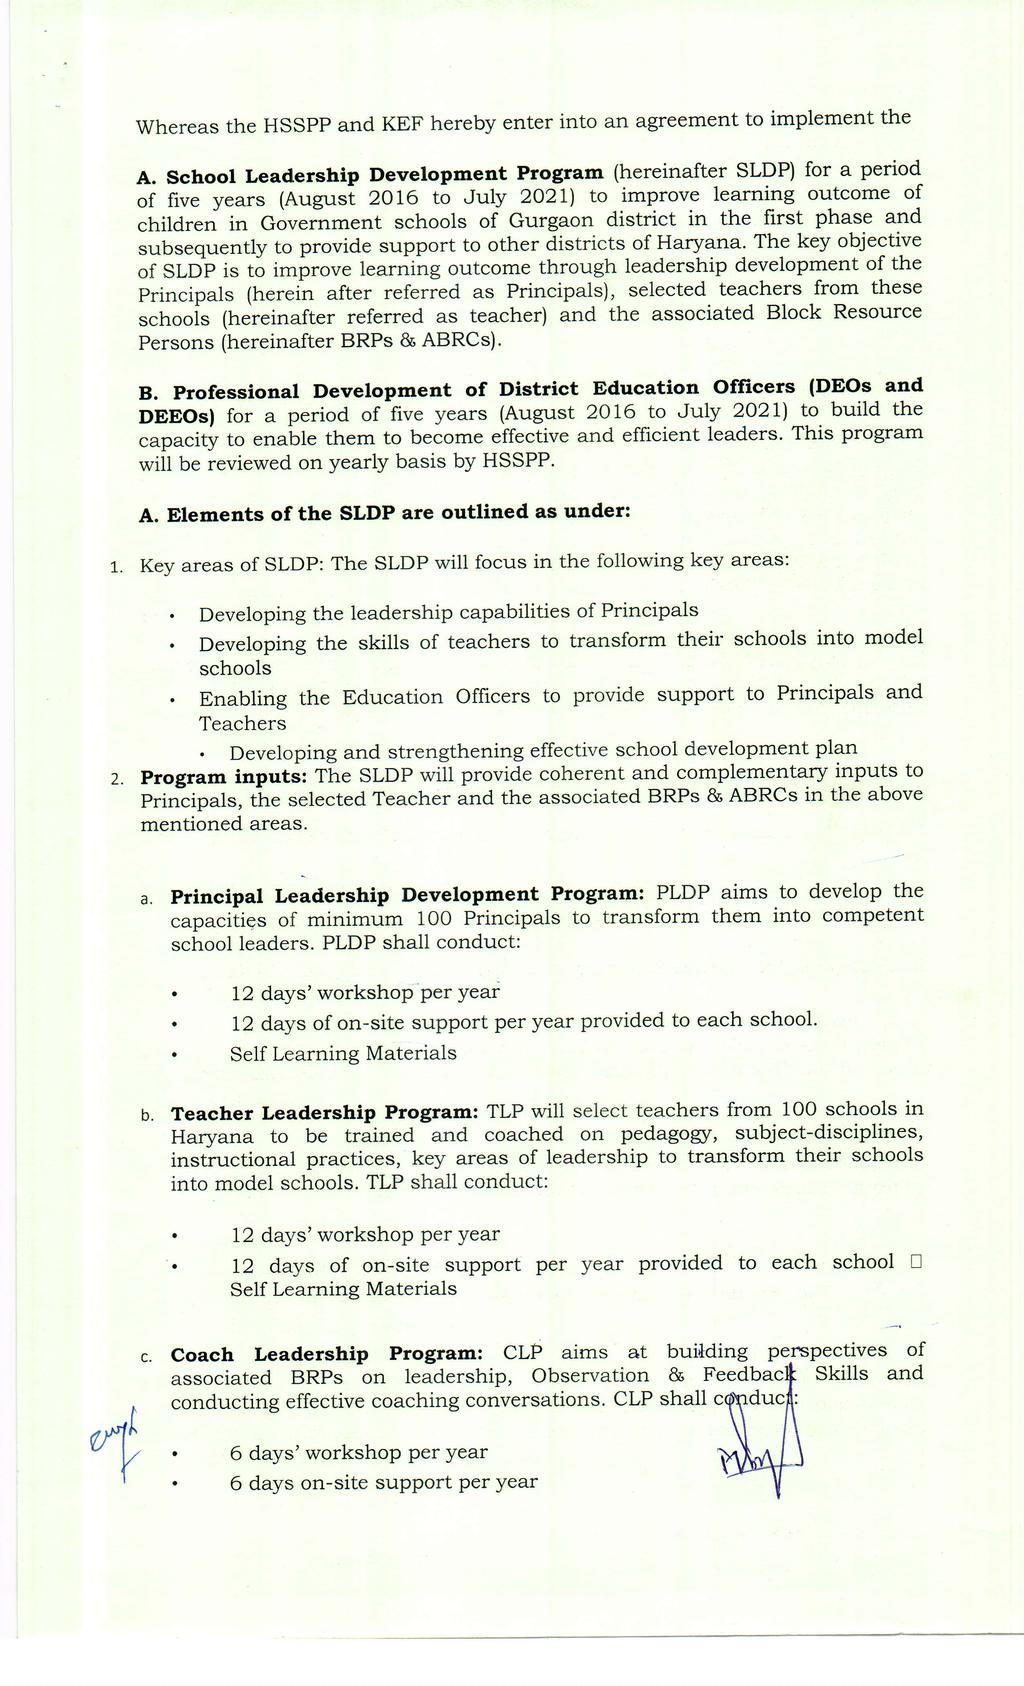 Wheres the HSSpp nd KEF hereby enter into n greement to implement the A. School Ledership Development Progrm (hereinfter SLDP) for period of five yers (Augusl 2016 to.